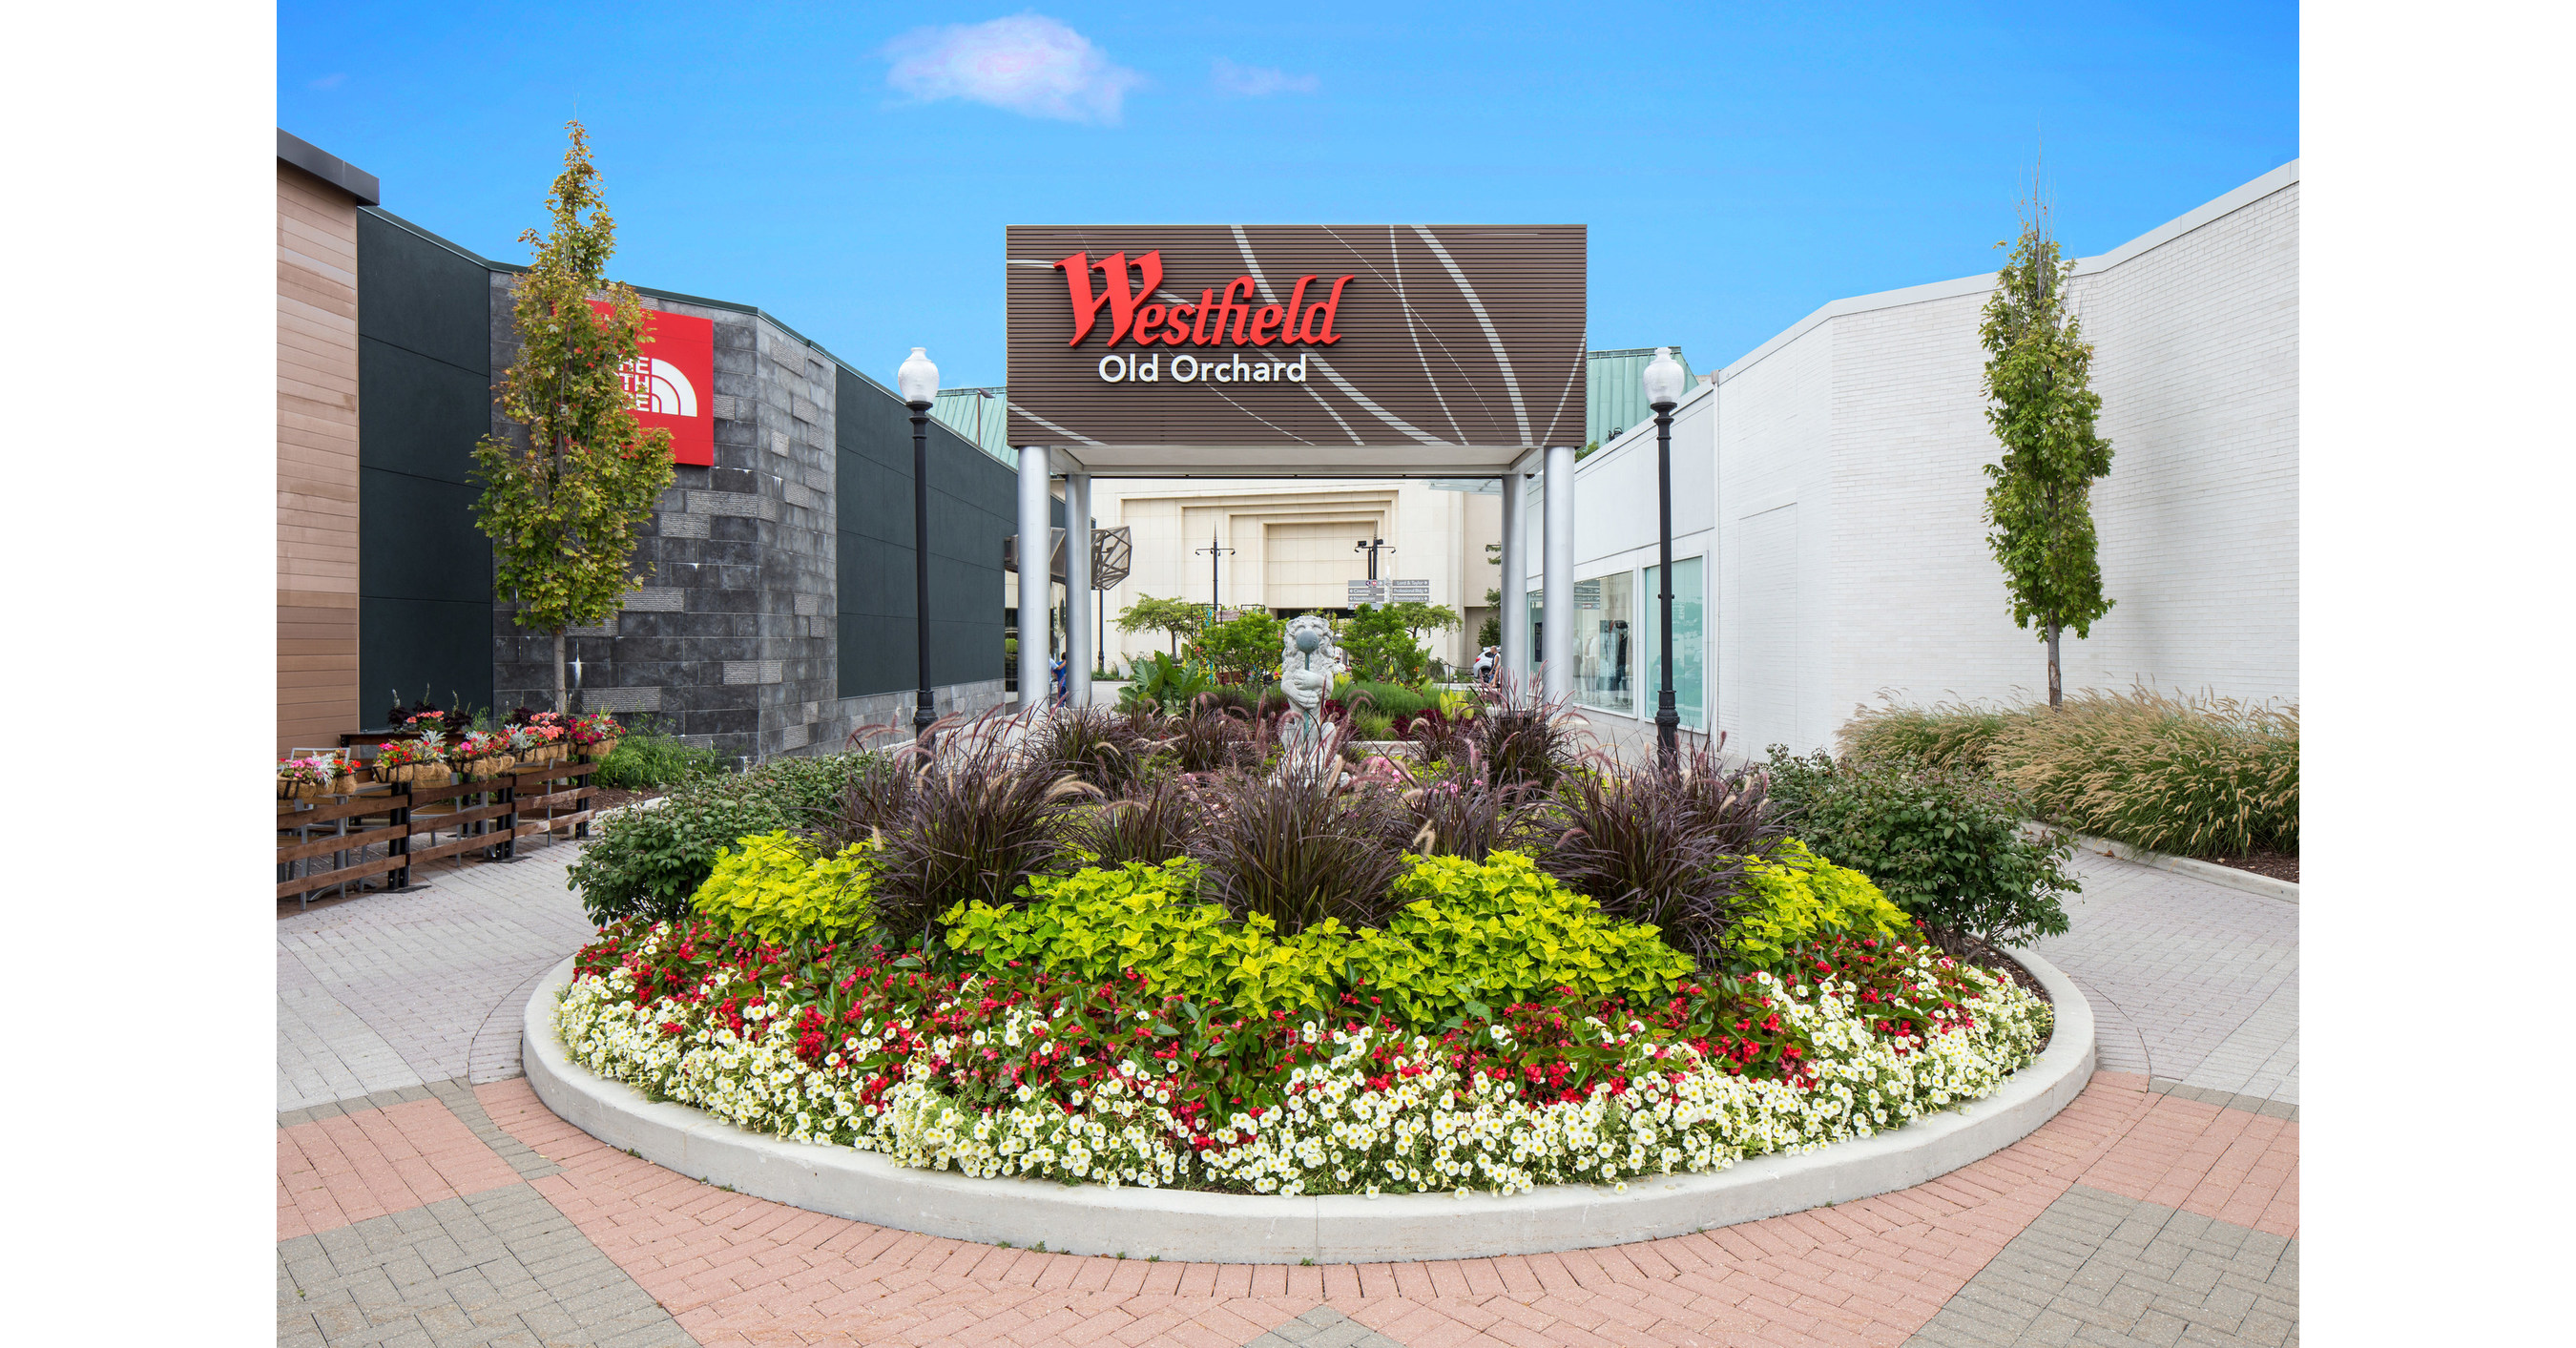 Westfield Old Orchard, Malls and Retail Wiki